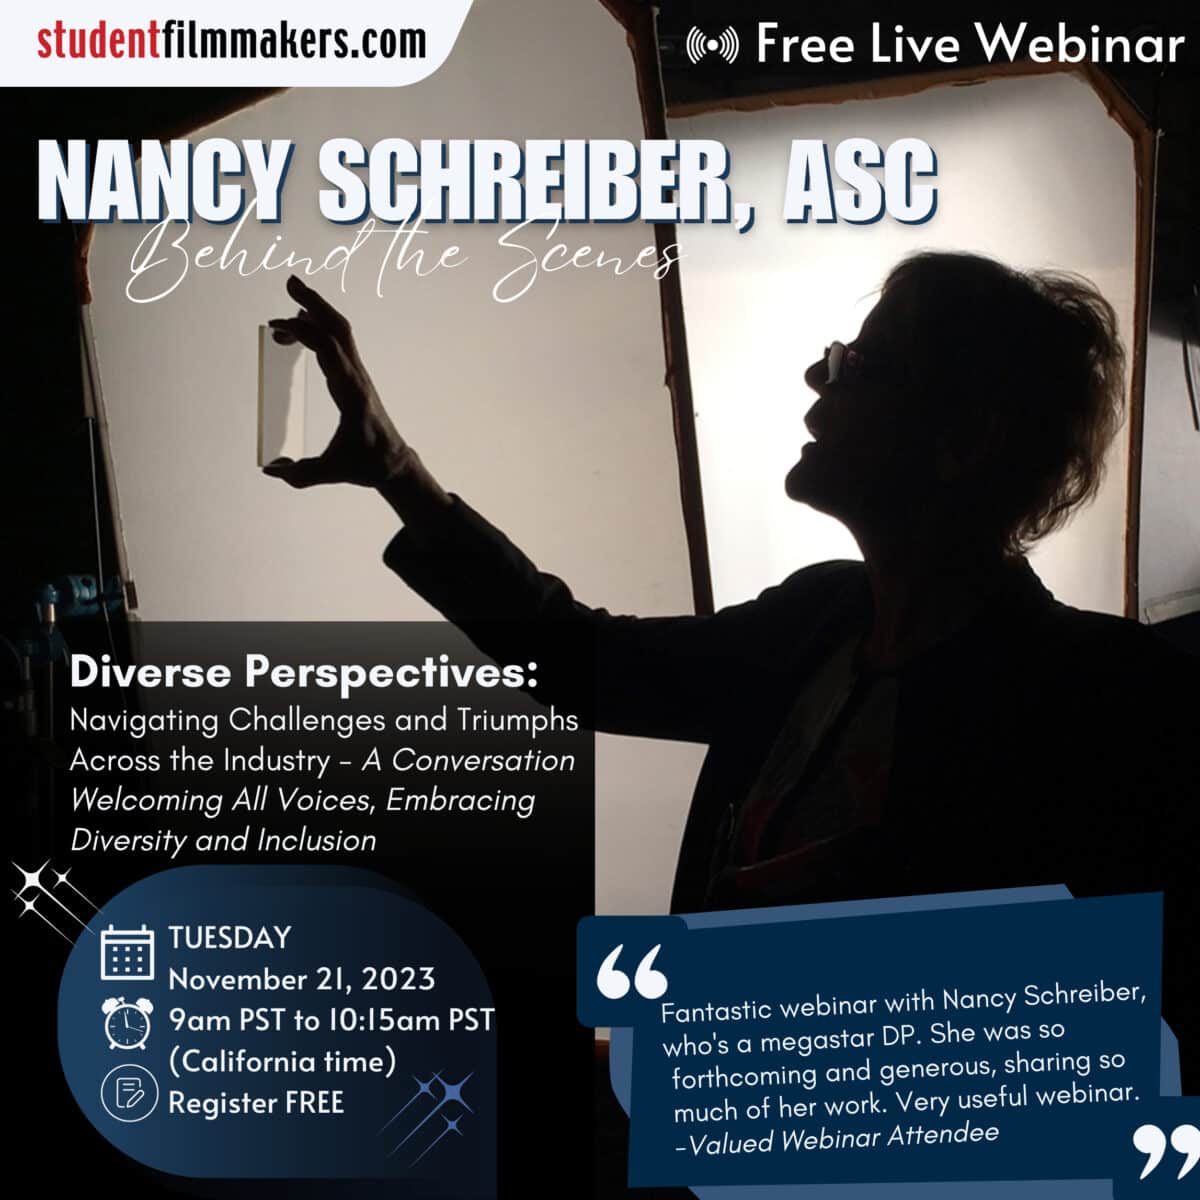 Live Webinar - Behind the Scenes with Nancy Schreiber ASC - Diverse Perspectives: Navigating Challenges and Triumphs Across the Industry - A Conversation Welcoming All Voices, Embracing Diversity and Inclusion